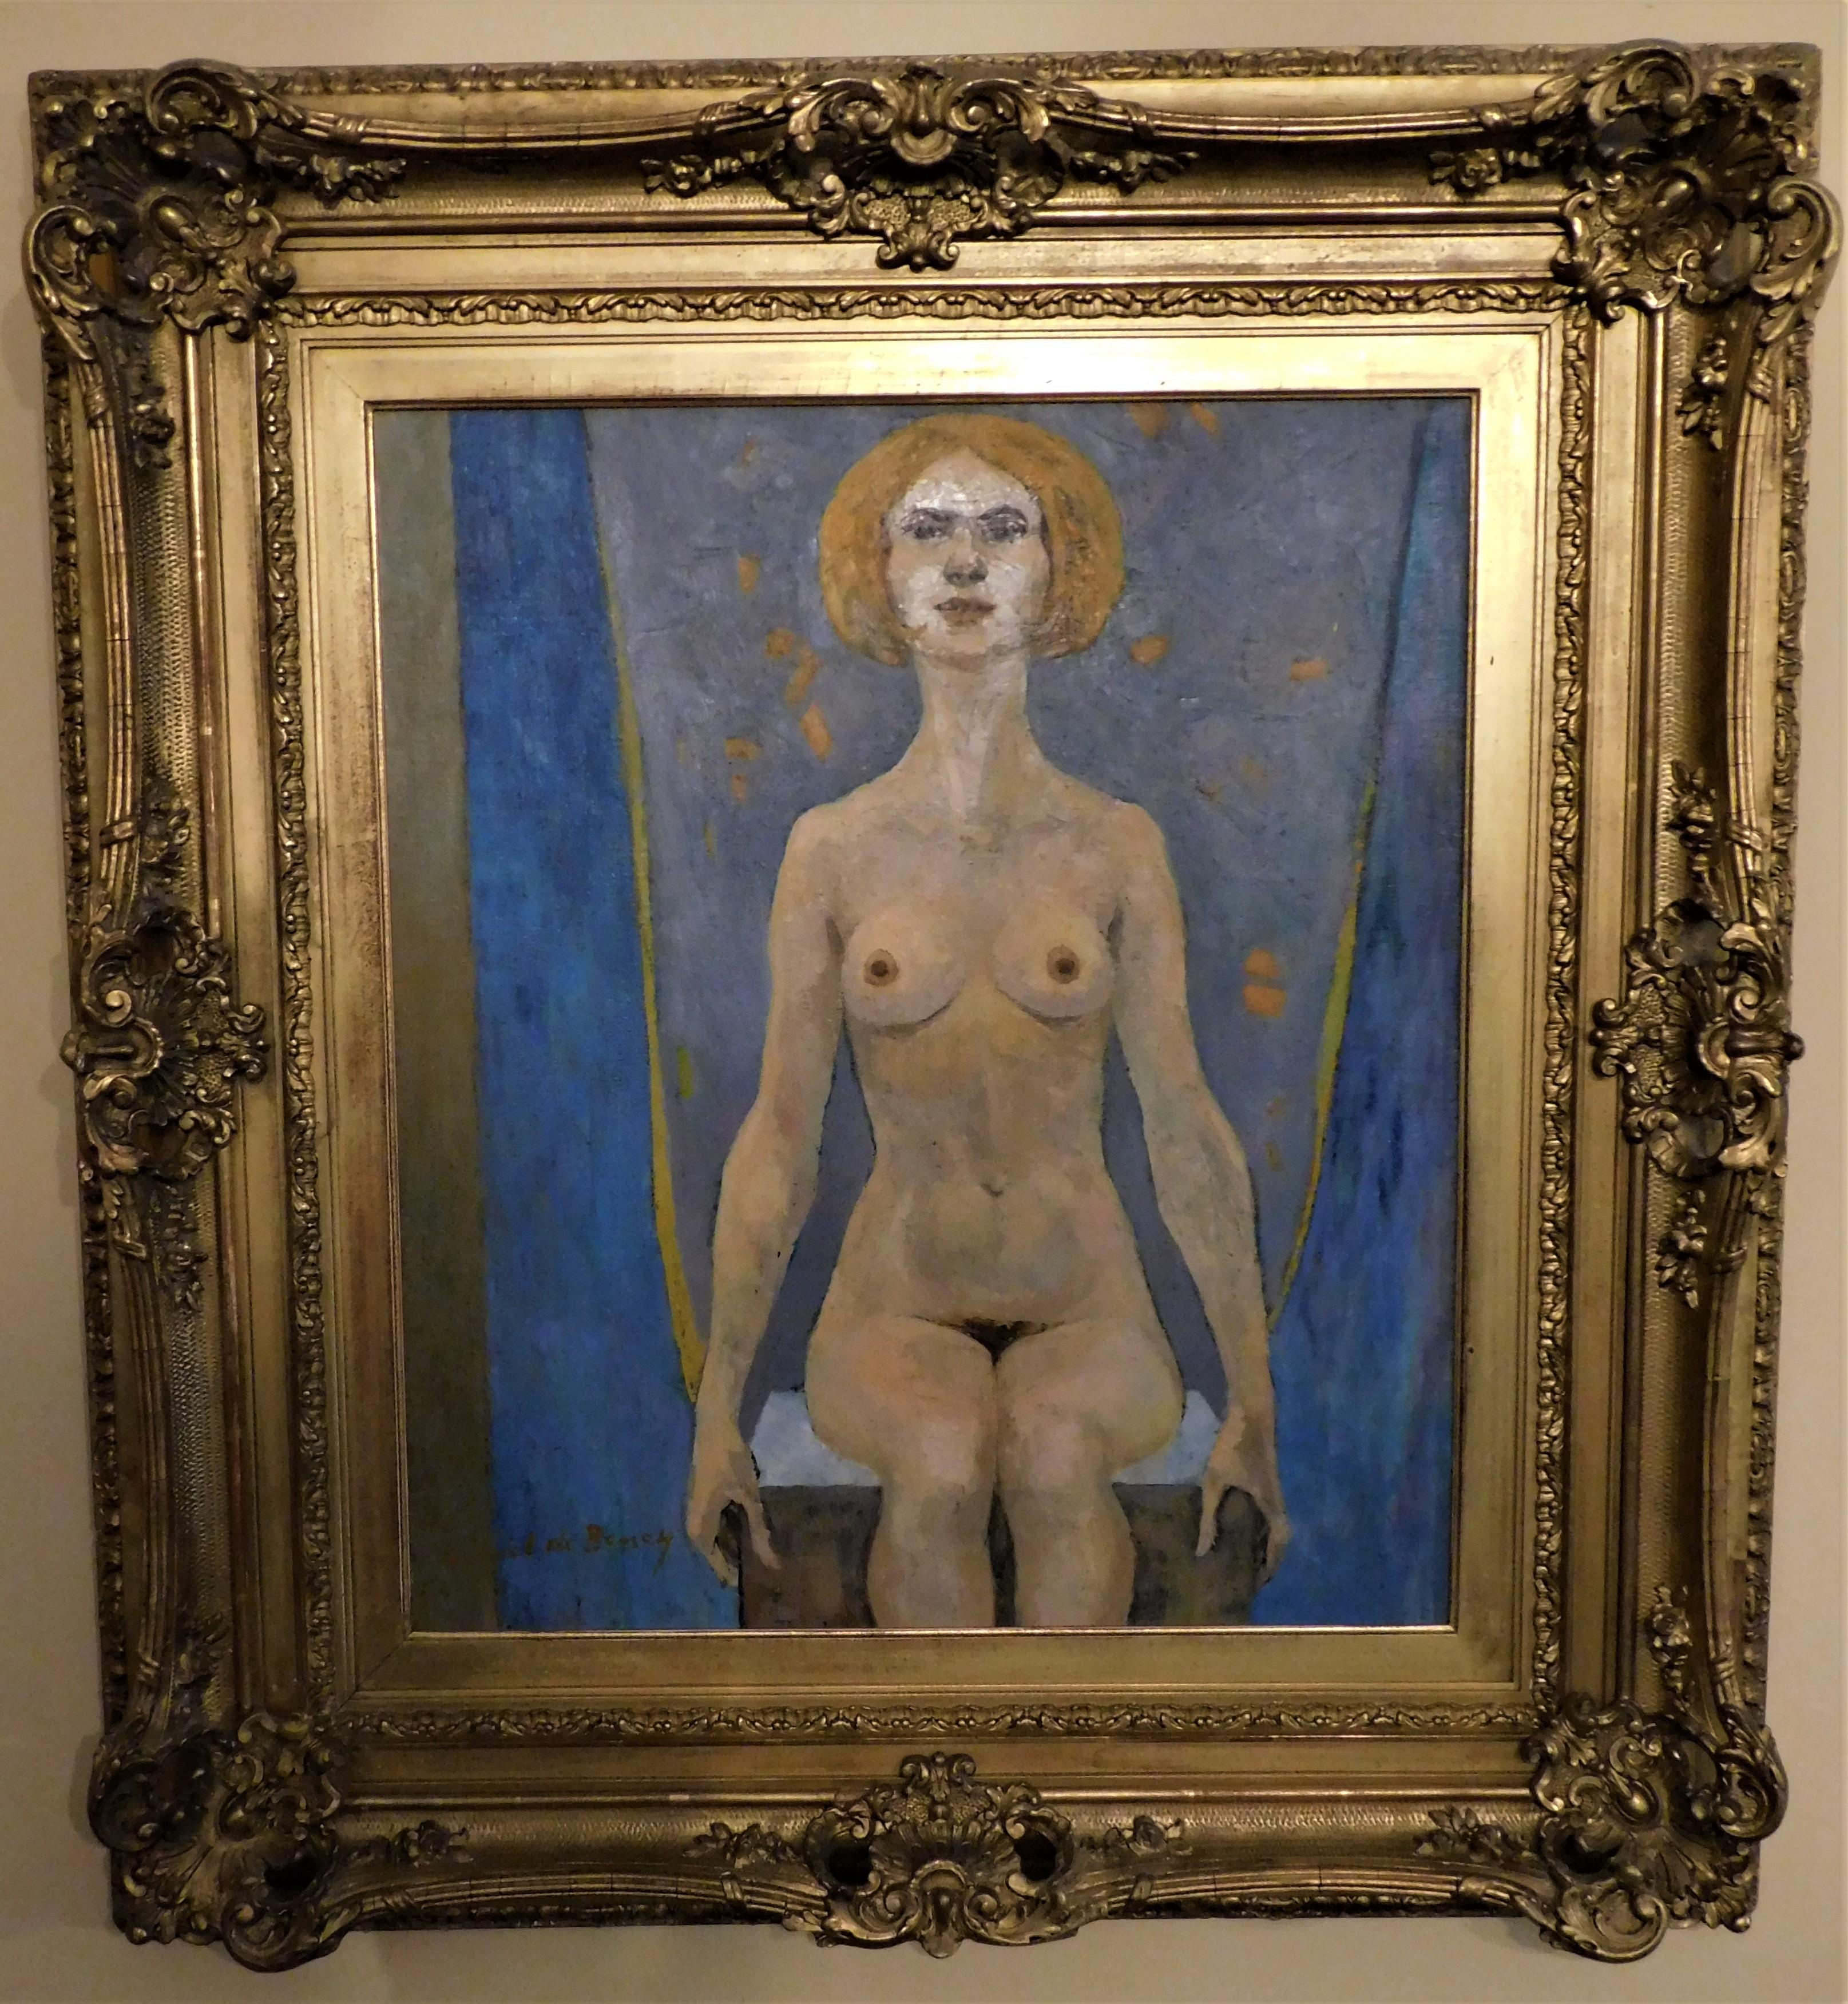 Oil on canvas nude woman painting by Canadian/French impressionist artist, illustrator Gabriel de Beney, circa 1970s. In a vintage antique ornate gold frame.
Actual painting size is 22.75 inches high by 19.75 inches wide by 1 inch deep. 

Gabriel